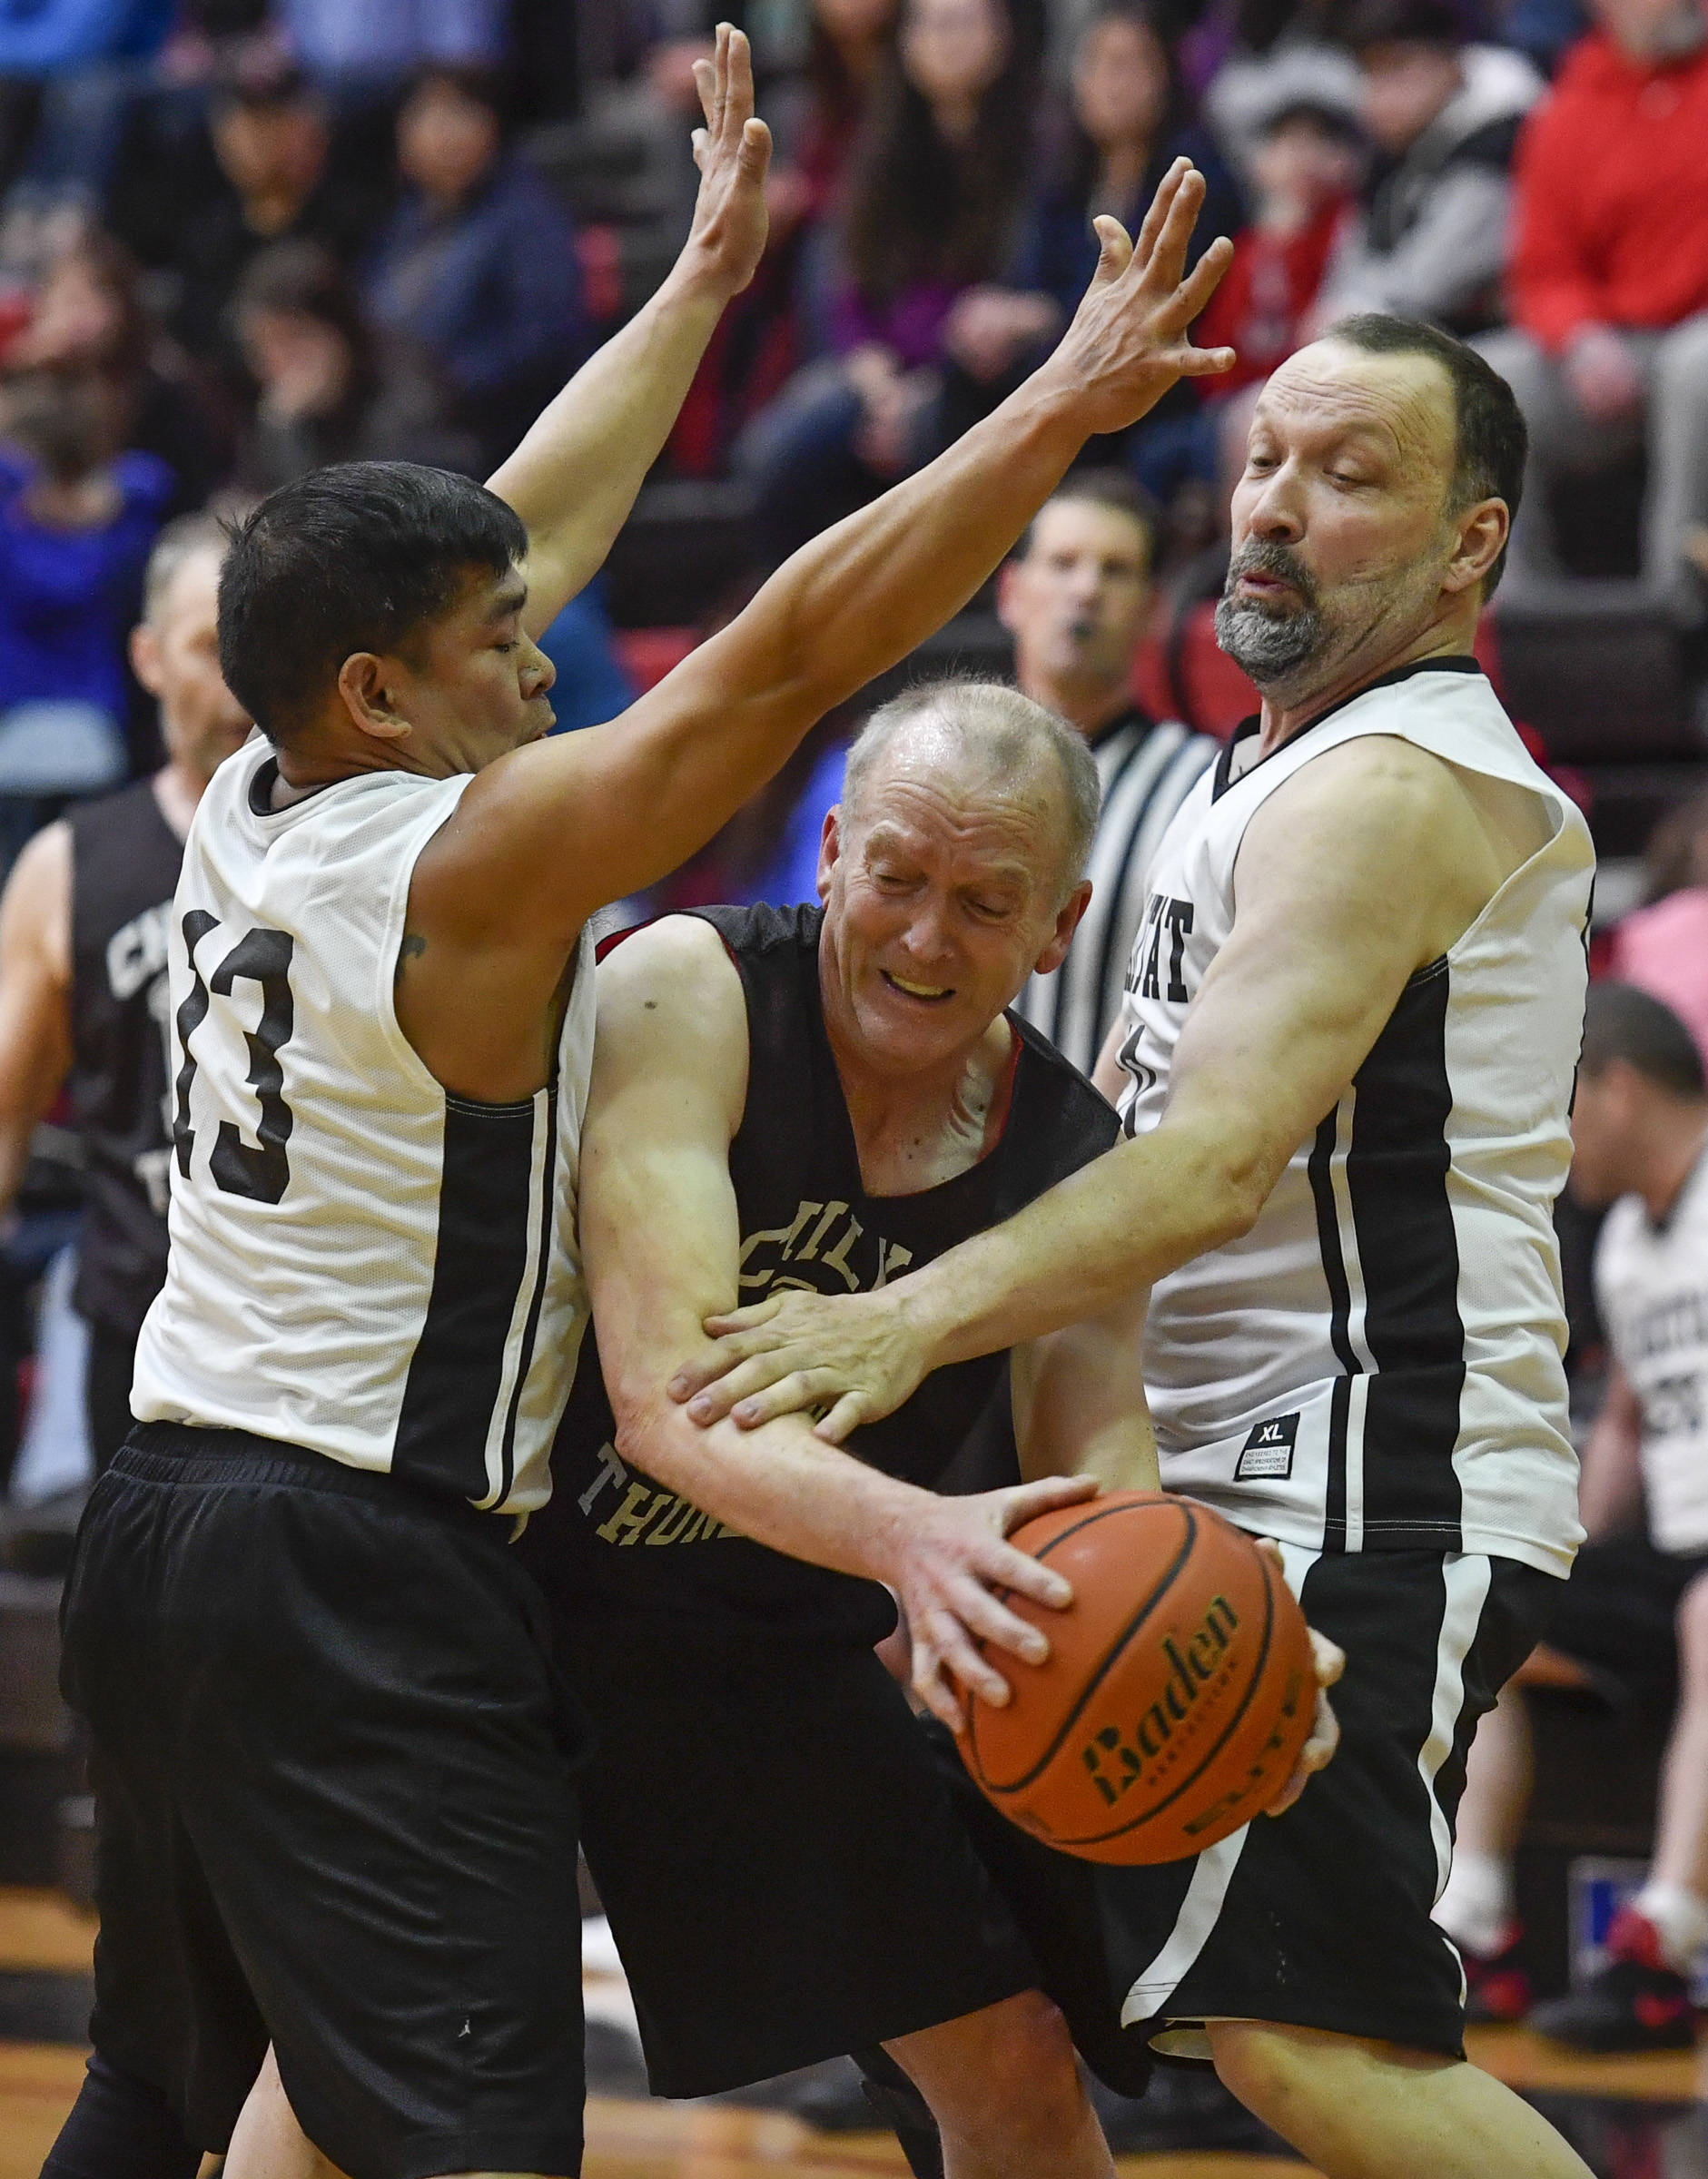 Klukwan’s Don Nash, center, is closely defended by Yakutat’s Jerry Riddington, left, and Greg Indreland during the Masters bracket game at the Juneau Lions Club 73rd Annual Gold Medal Basketball Tournament at Juneau-Douglas High School on Friday, March 22, 2019. Klukwan won 63-58. (Michael Penn | Juneau Empire)